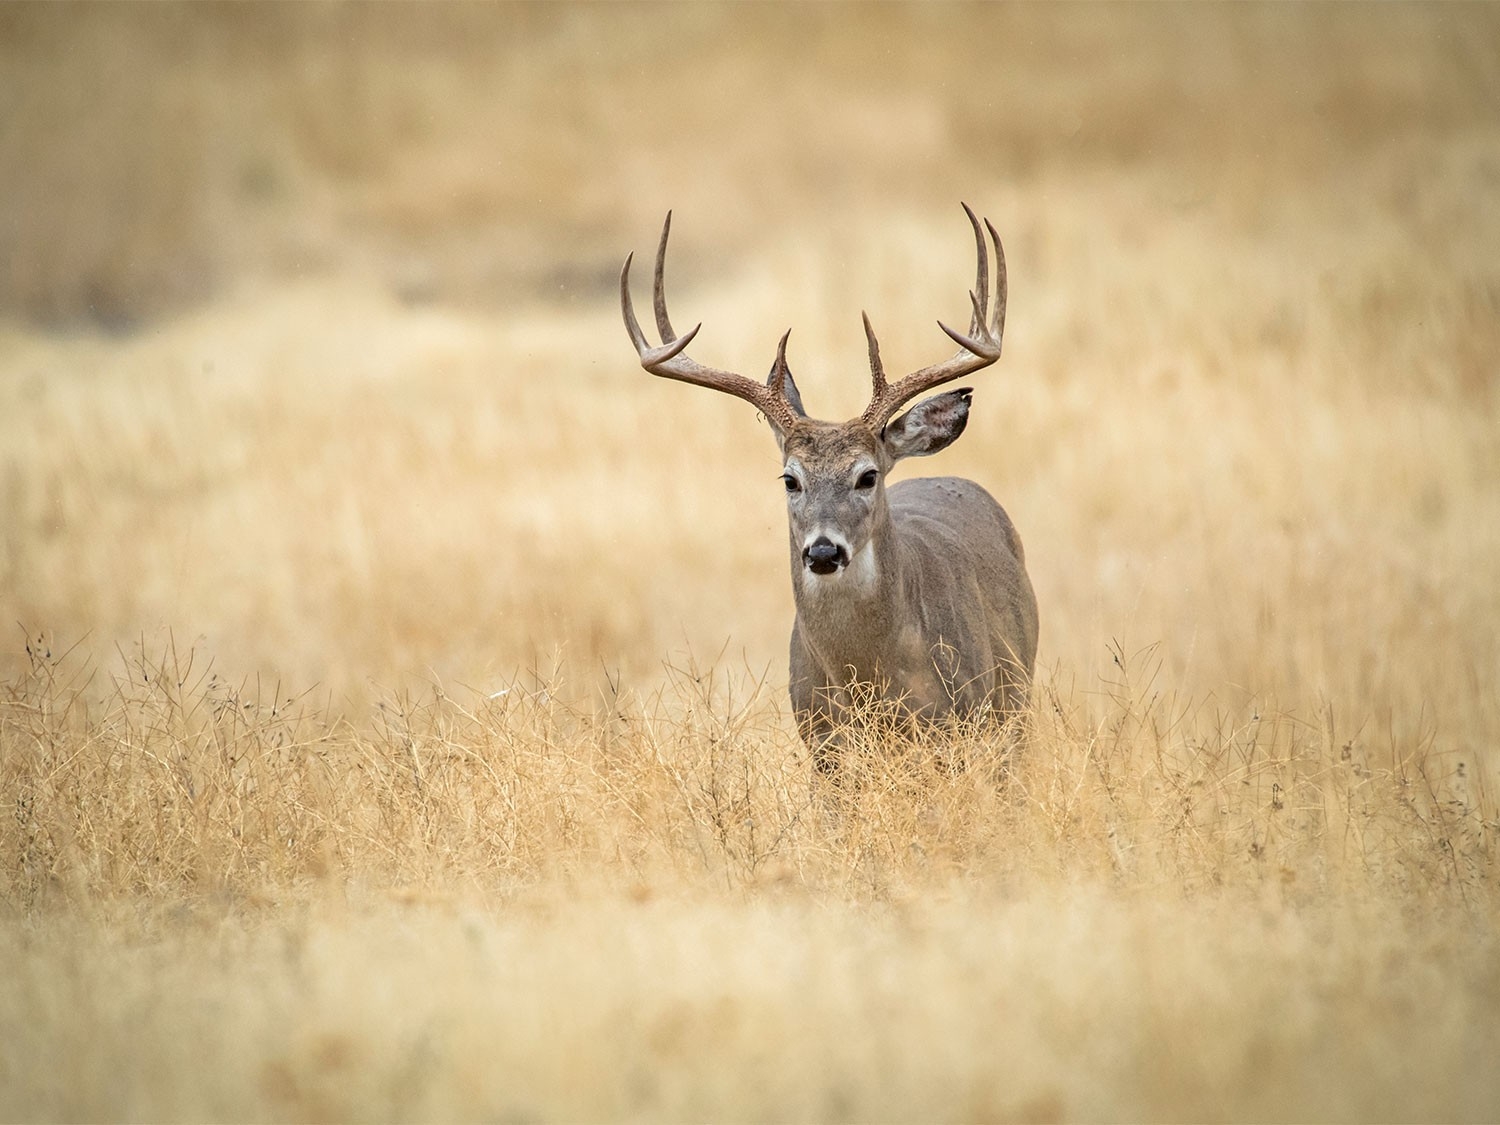 The 7 Best Days Of The 2020 Whitetail Deer Rut | Field &amp; Stream-2021 Whitetail Rut Predictions